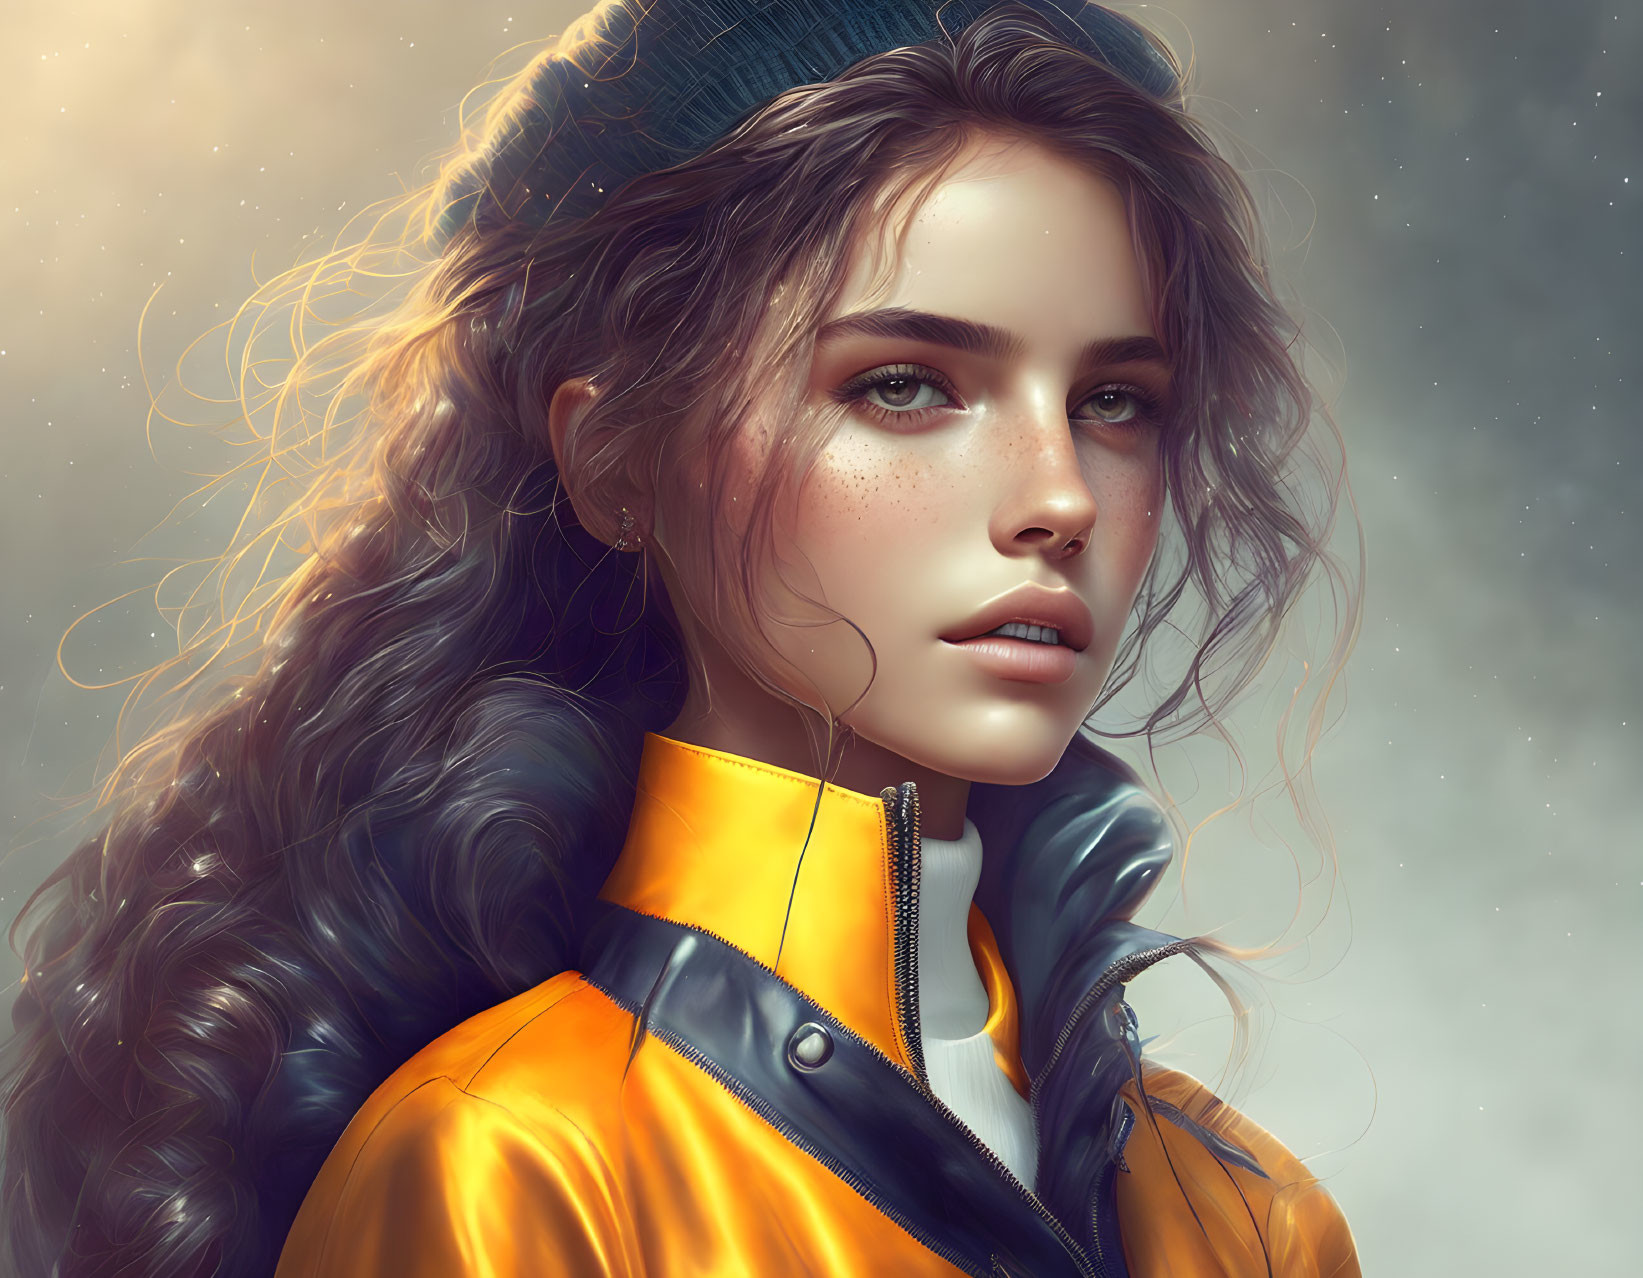 Digital art portrait of woman with wavy hair, freckles, intense eyes, yellow leather jacket